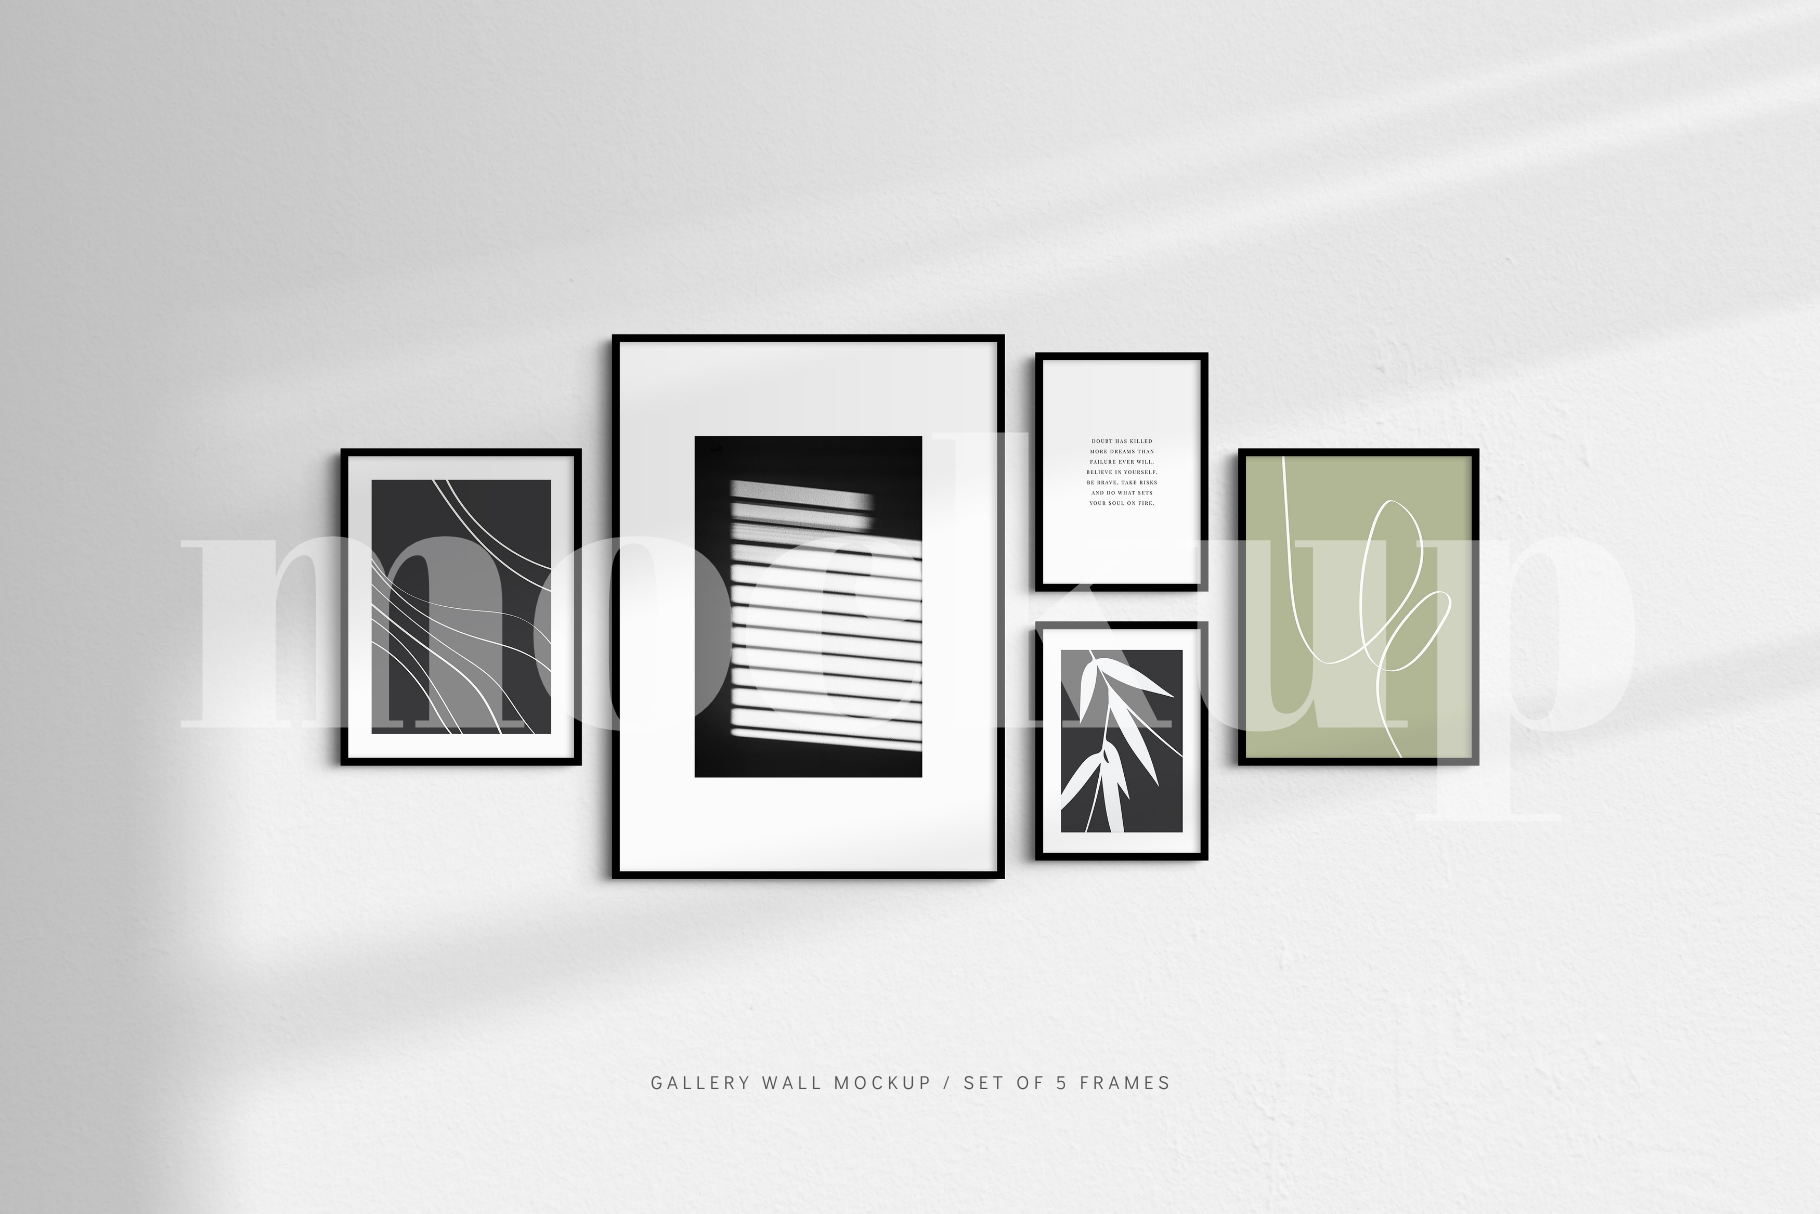 Showcase your artwork in an elegant, modern way with this customizable and easy-to-use minimalist gallery wall frame mockup that features a set of 5 thin black frames.